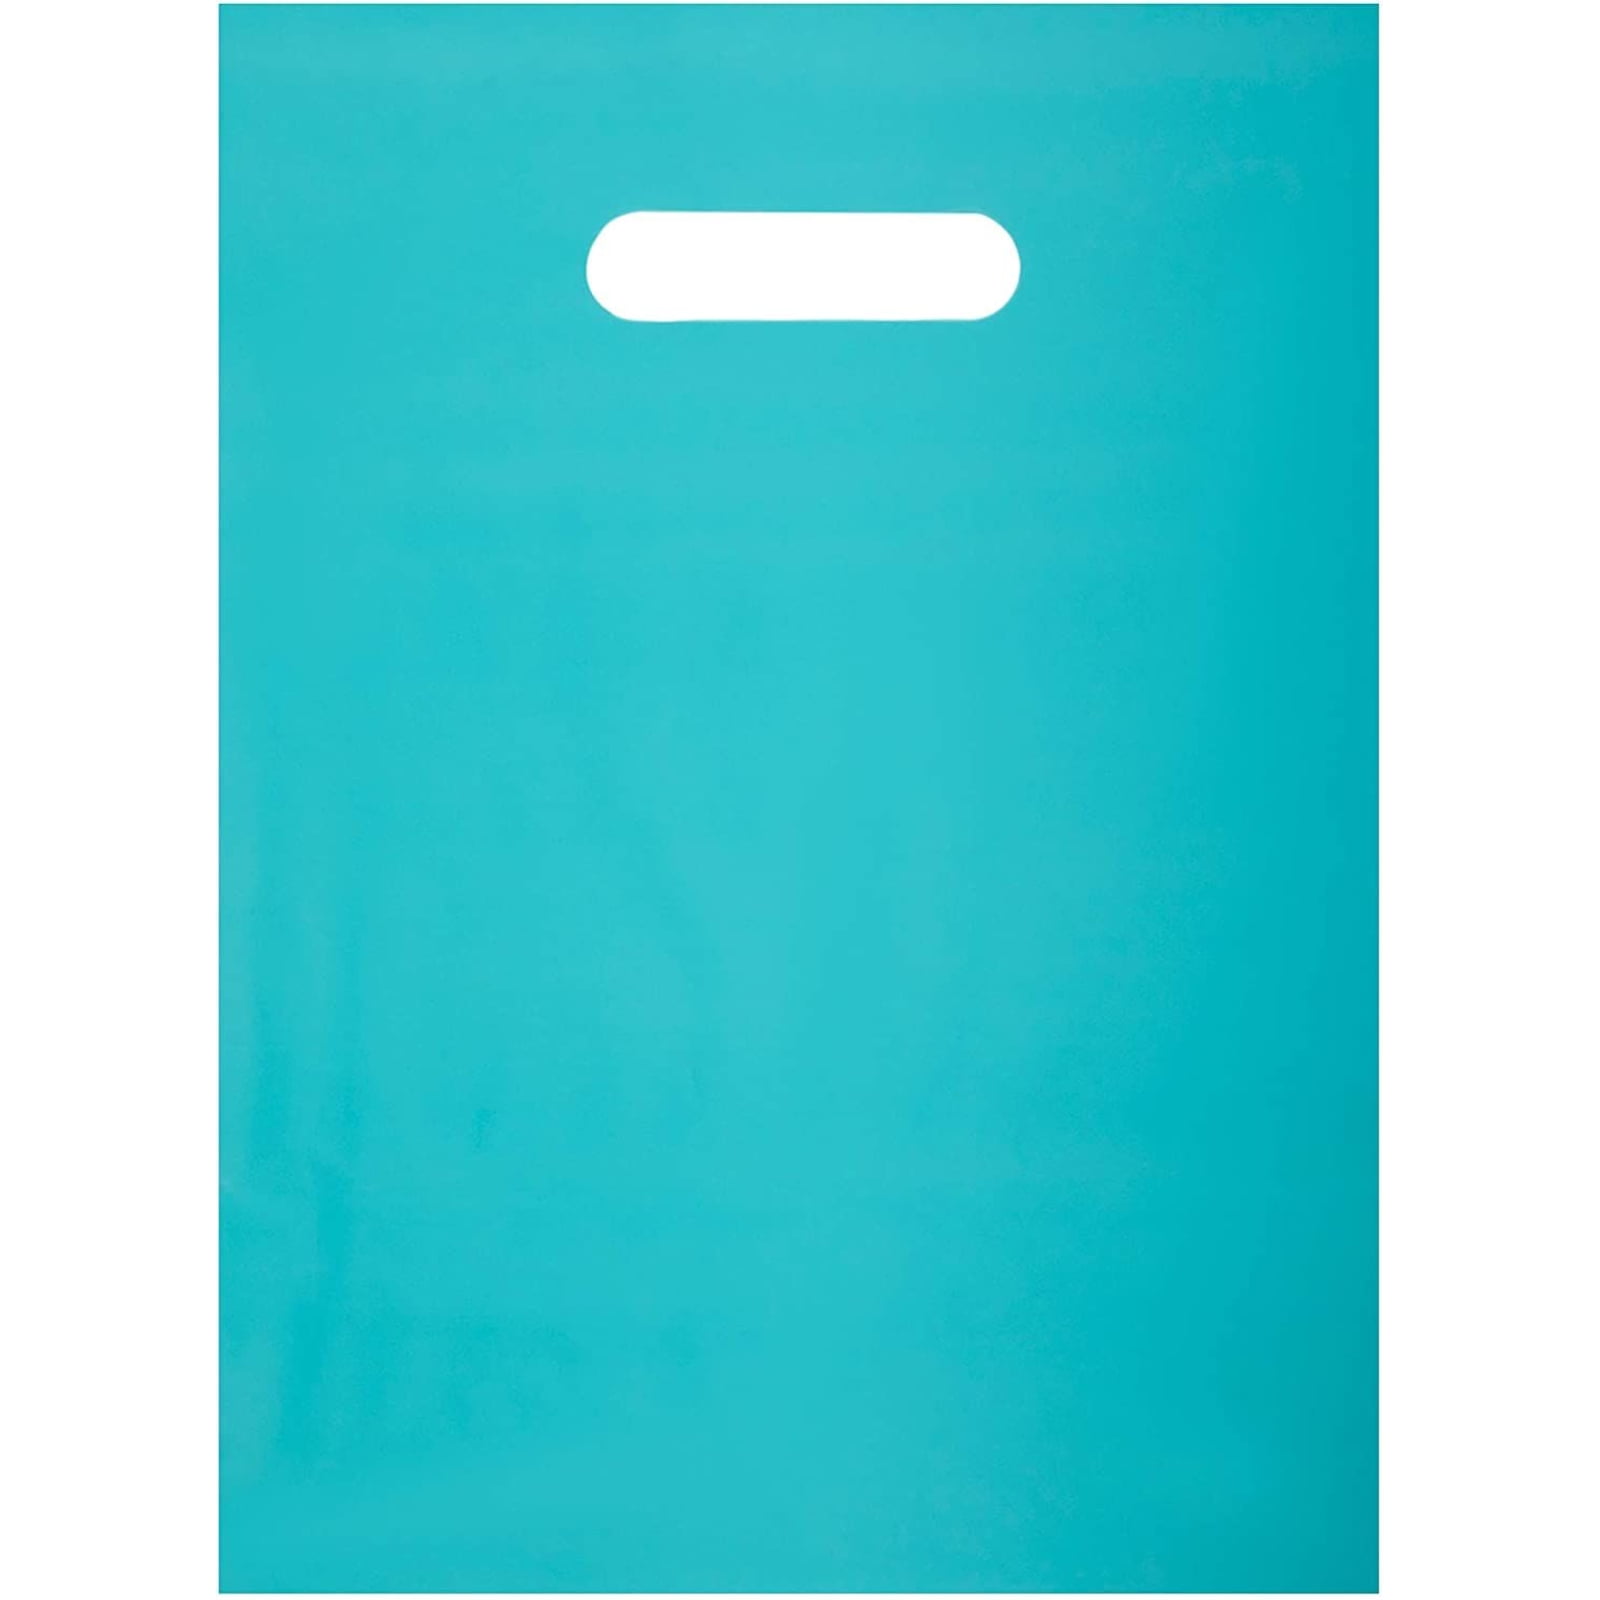 100-Pack No Gusset Black Cat Avenue Premium Heavy Duty Glossy Plastic Merchandise Bags with Handle 12x15,Teal 12x15 